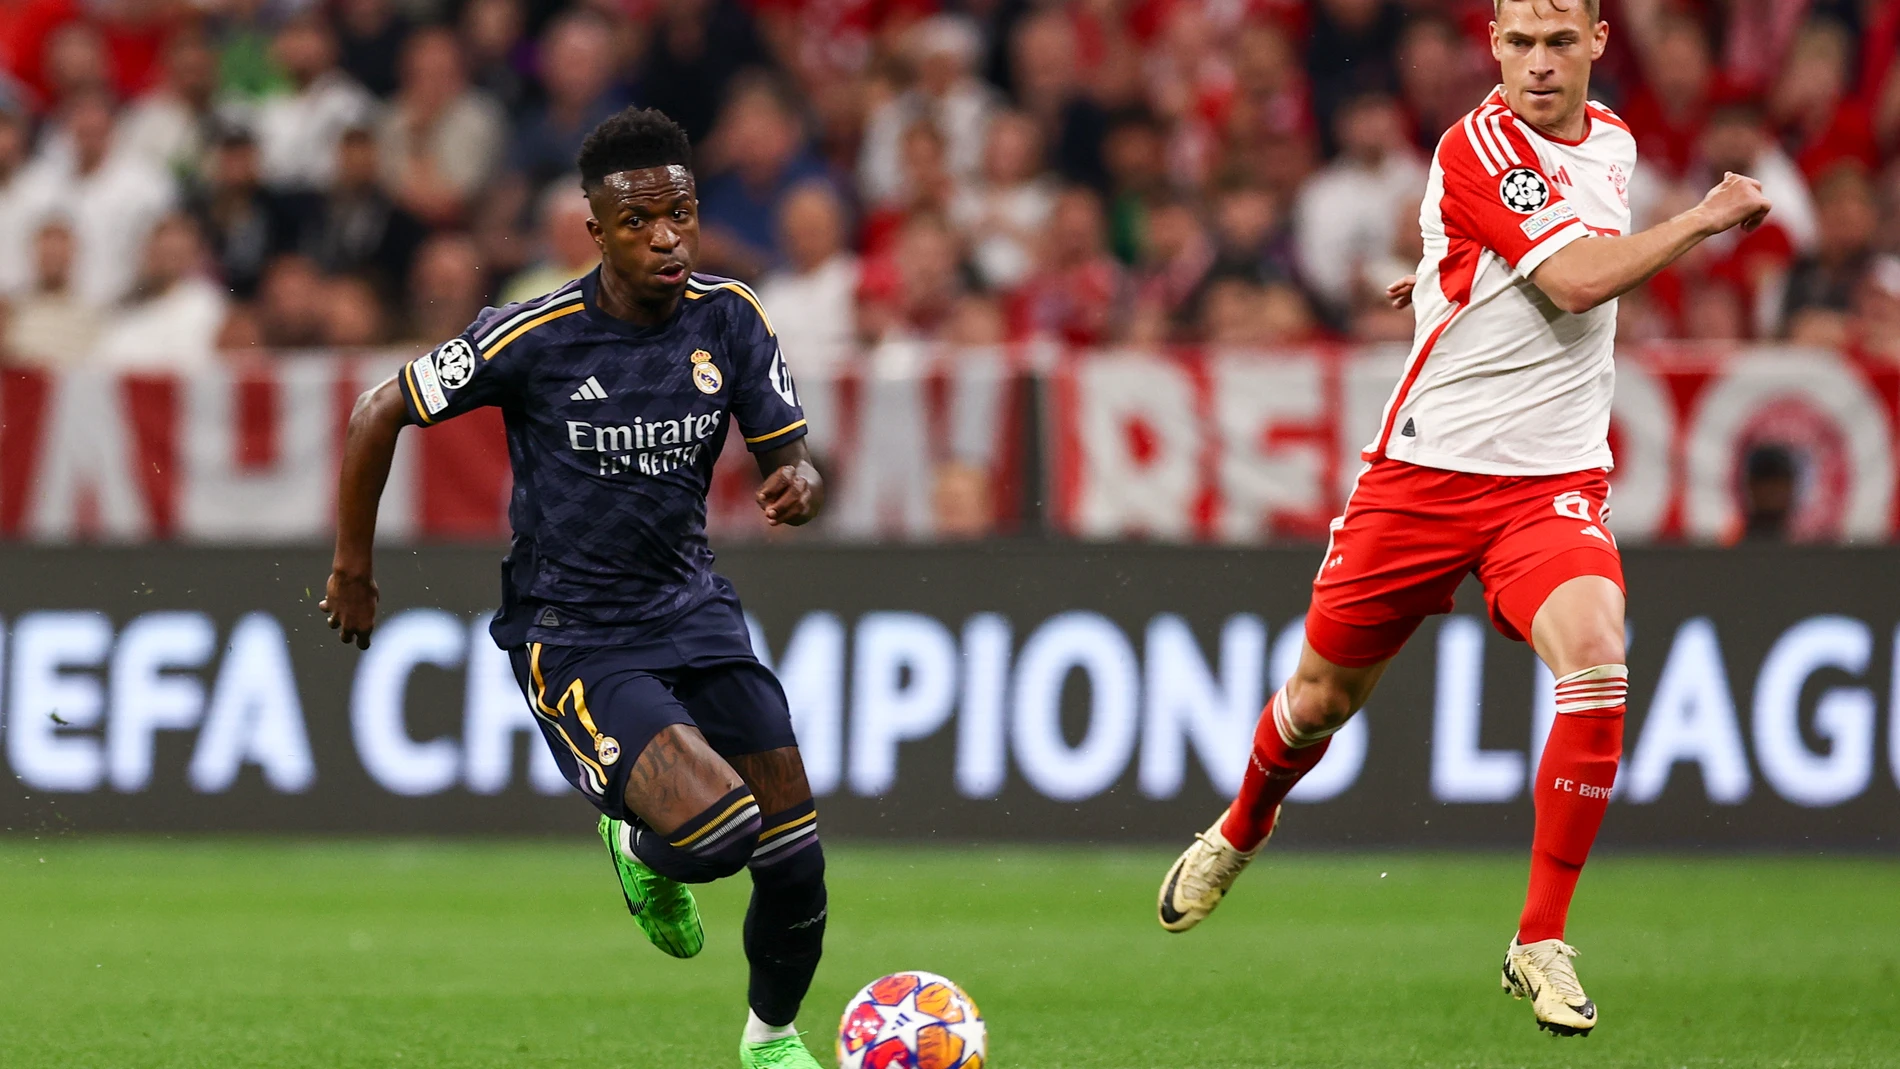 Munich (Germany), 29/04/2024.- Madrid's Vinicius Junior (L) in action against Munich's Joshua Kimmich (R) during the UEFA Champions League semi final, 1st leg match between Bayern Munich and Real Madrid in Munich, Germany, 30 April 2024. (Liga de Campeones, Alemania) EFE/EPA/ANNA SZILAGYI 